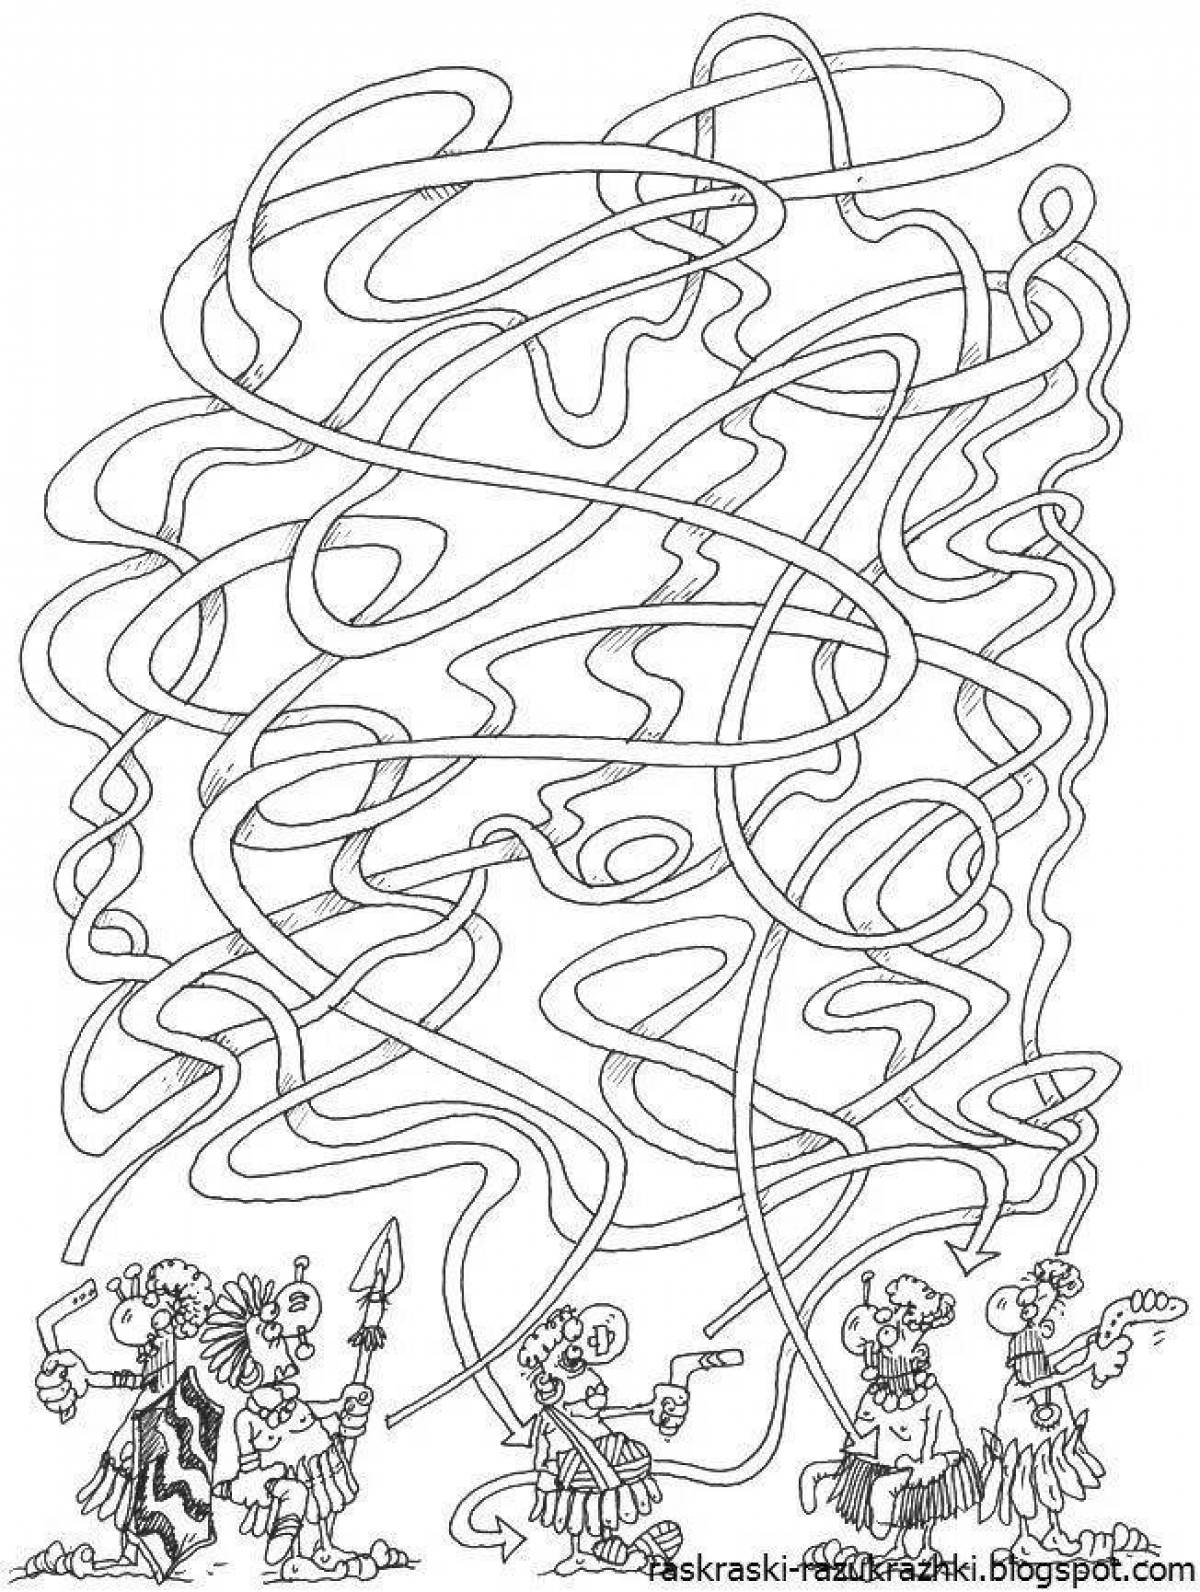 Fun coloring maze for kids 7-8 years old